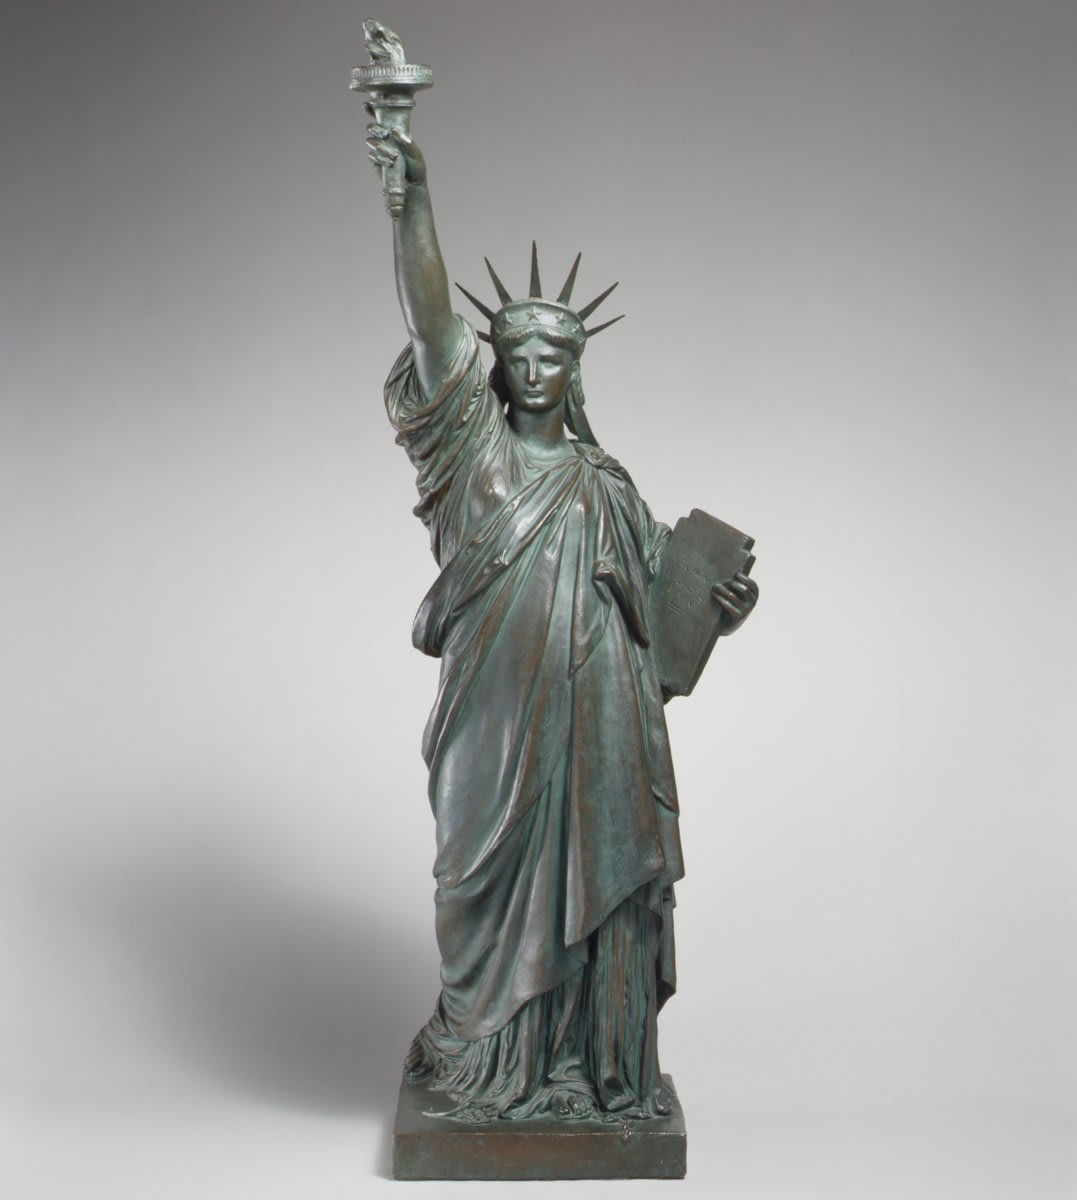 A gift of friendship from the French people to the United States, the Statue of Liberty—dedicated OTD in 1886—famously celebrates freedom. This “committee model” is part of an edition of replicas that were sold to help finance the project. Learn more: